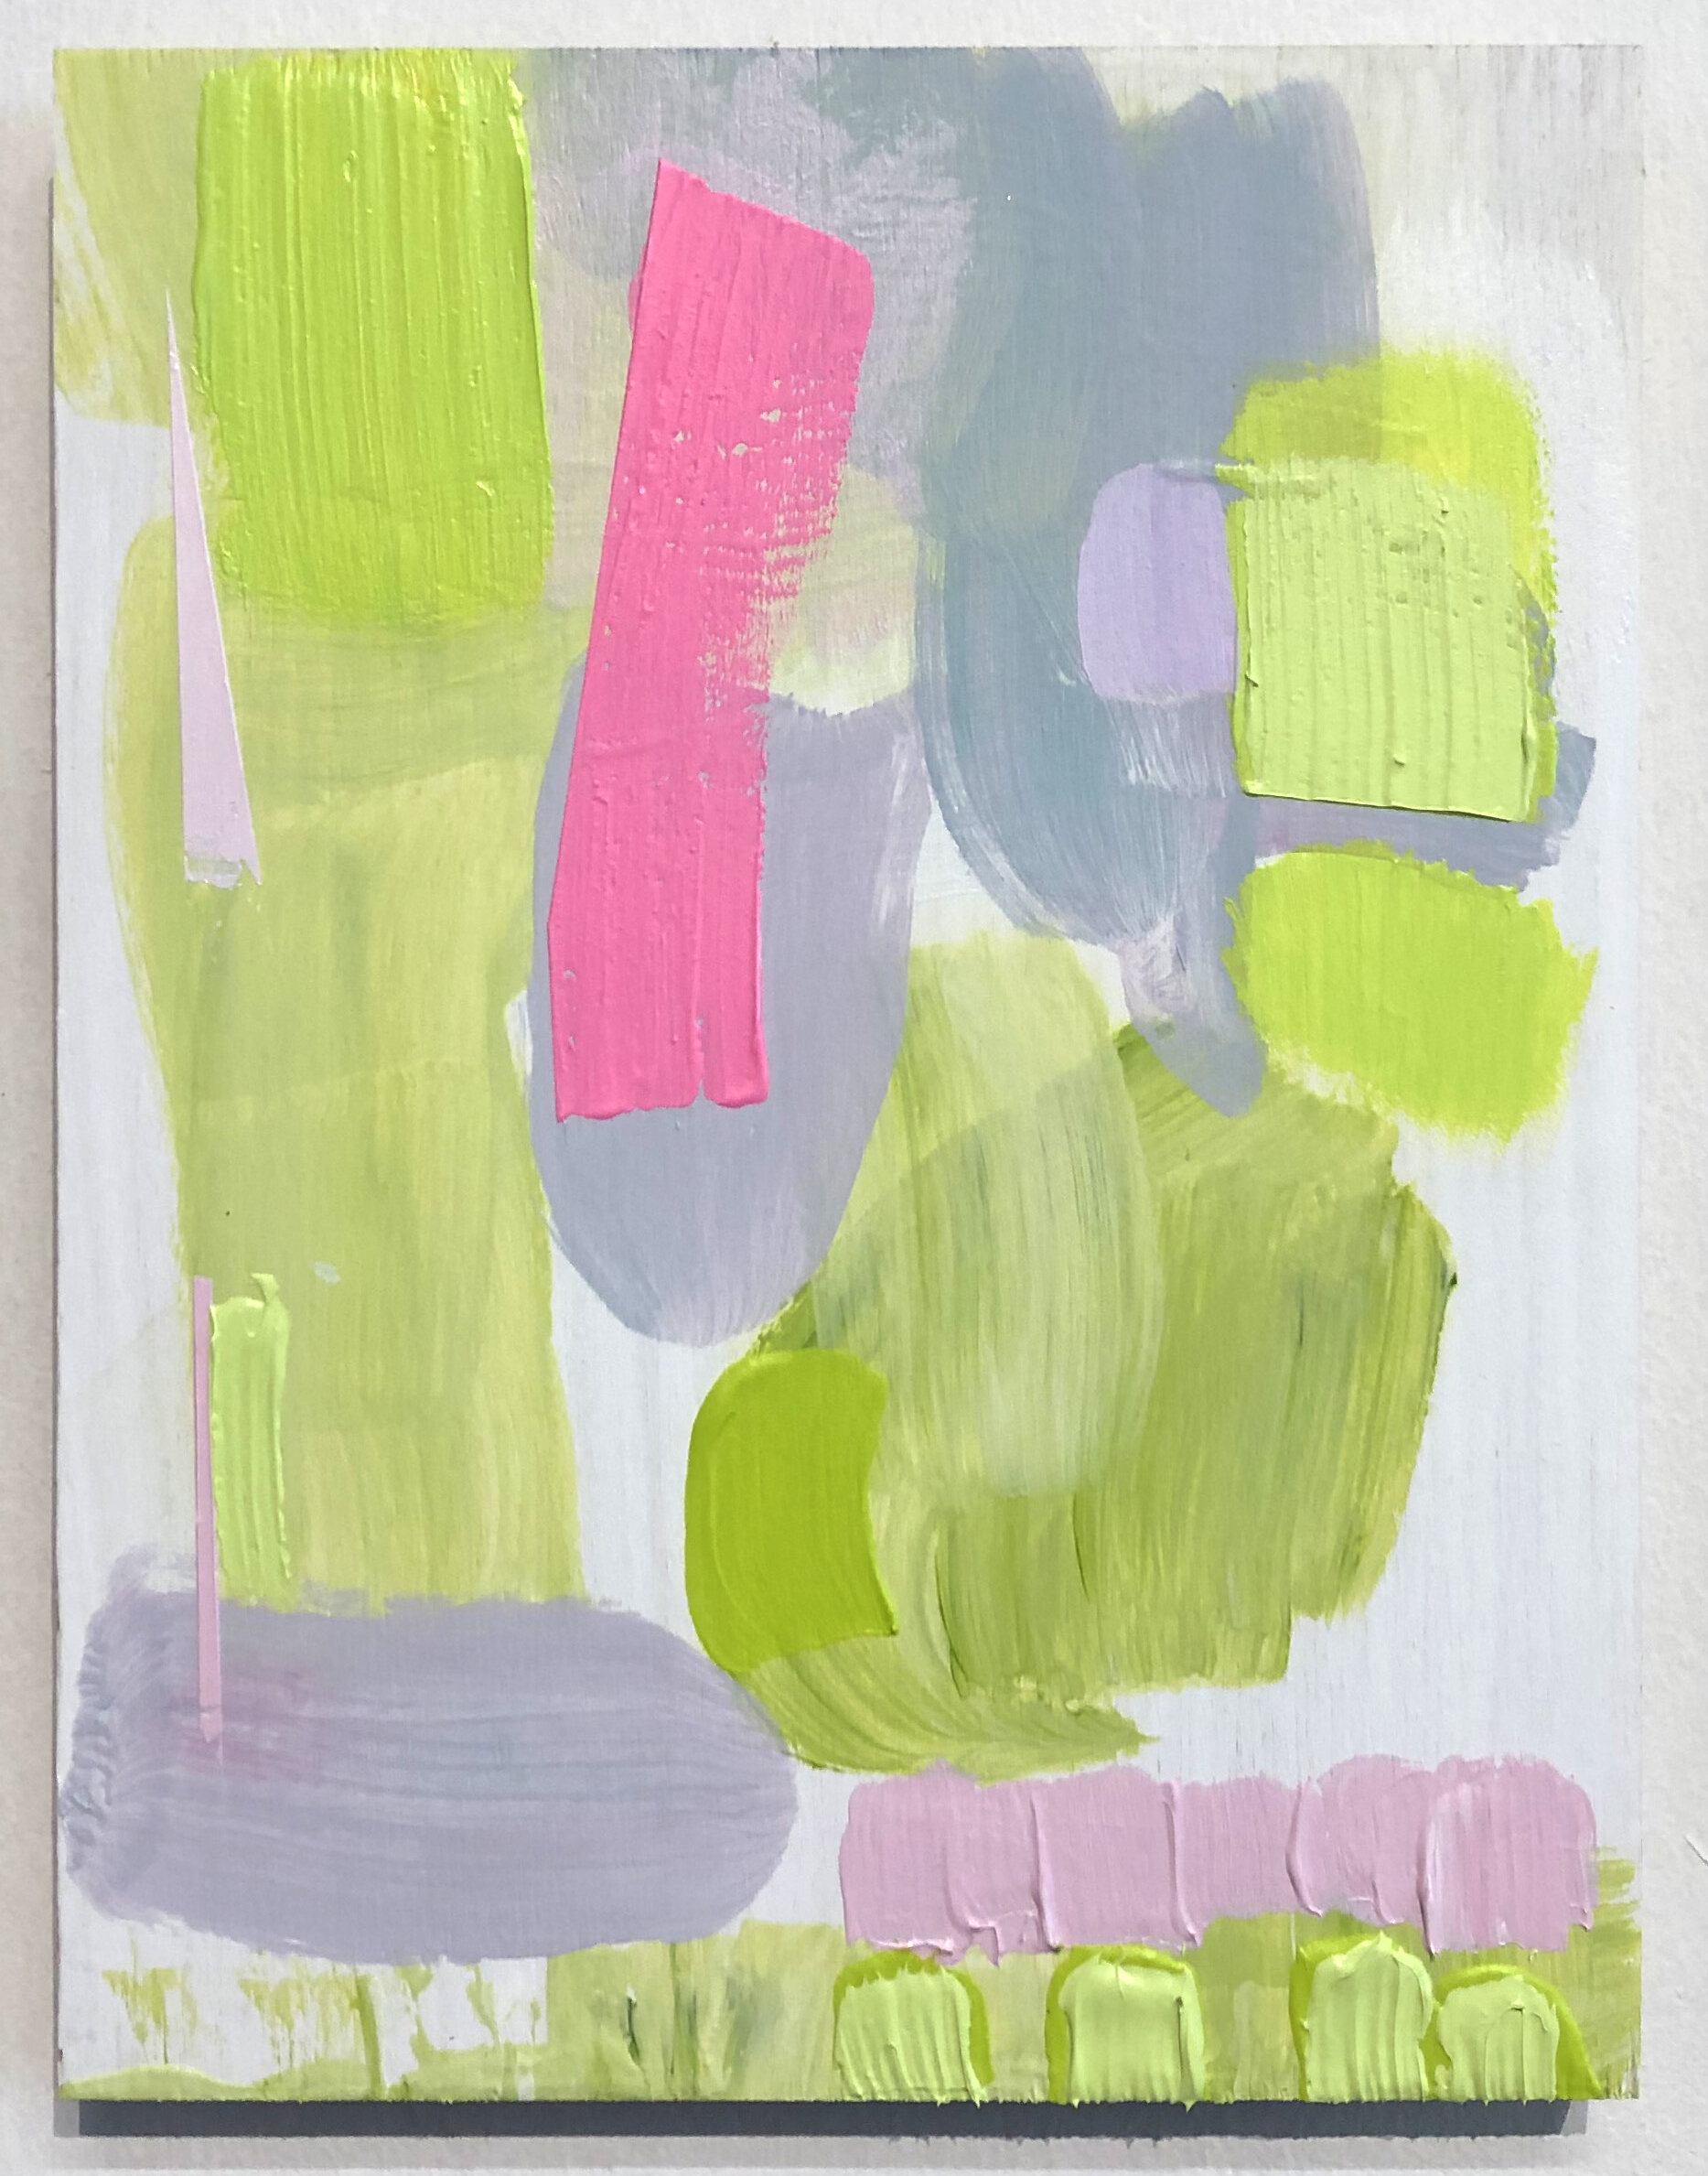   Green / Pink ( after Albers' "vibrating boundaries" chapter )  Gesso, acrylic and gouache on wood panel 8.5 x 11 inches 2021 